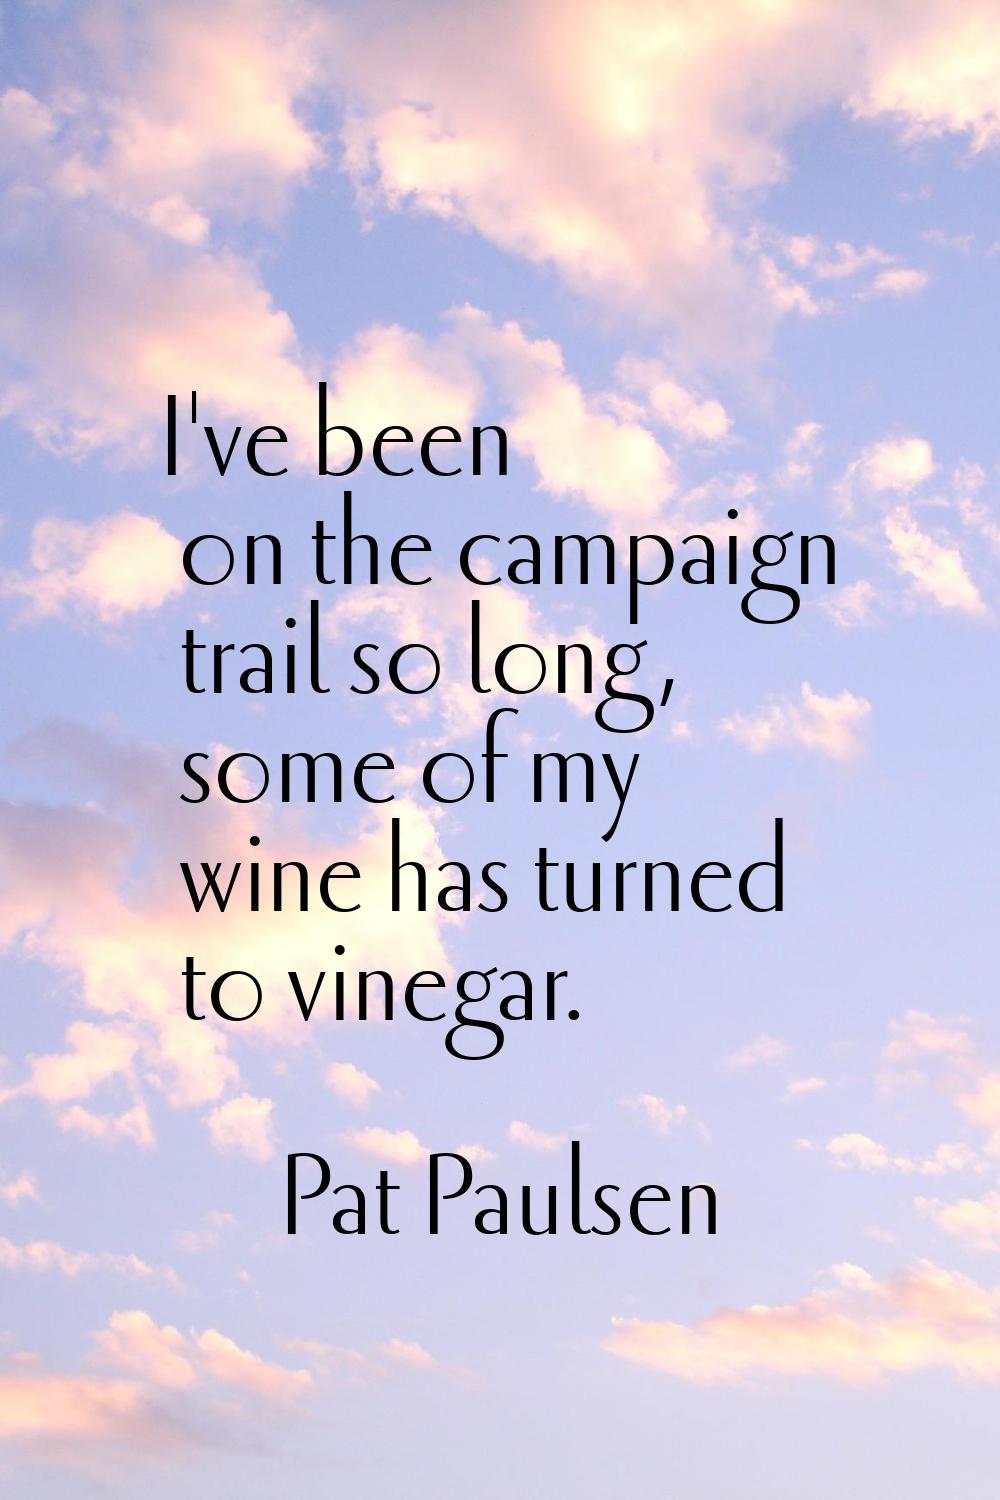 I've been on the campaign trail so long, some of my wine has turned to vinegar.